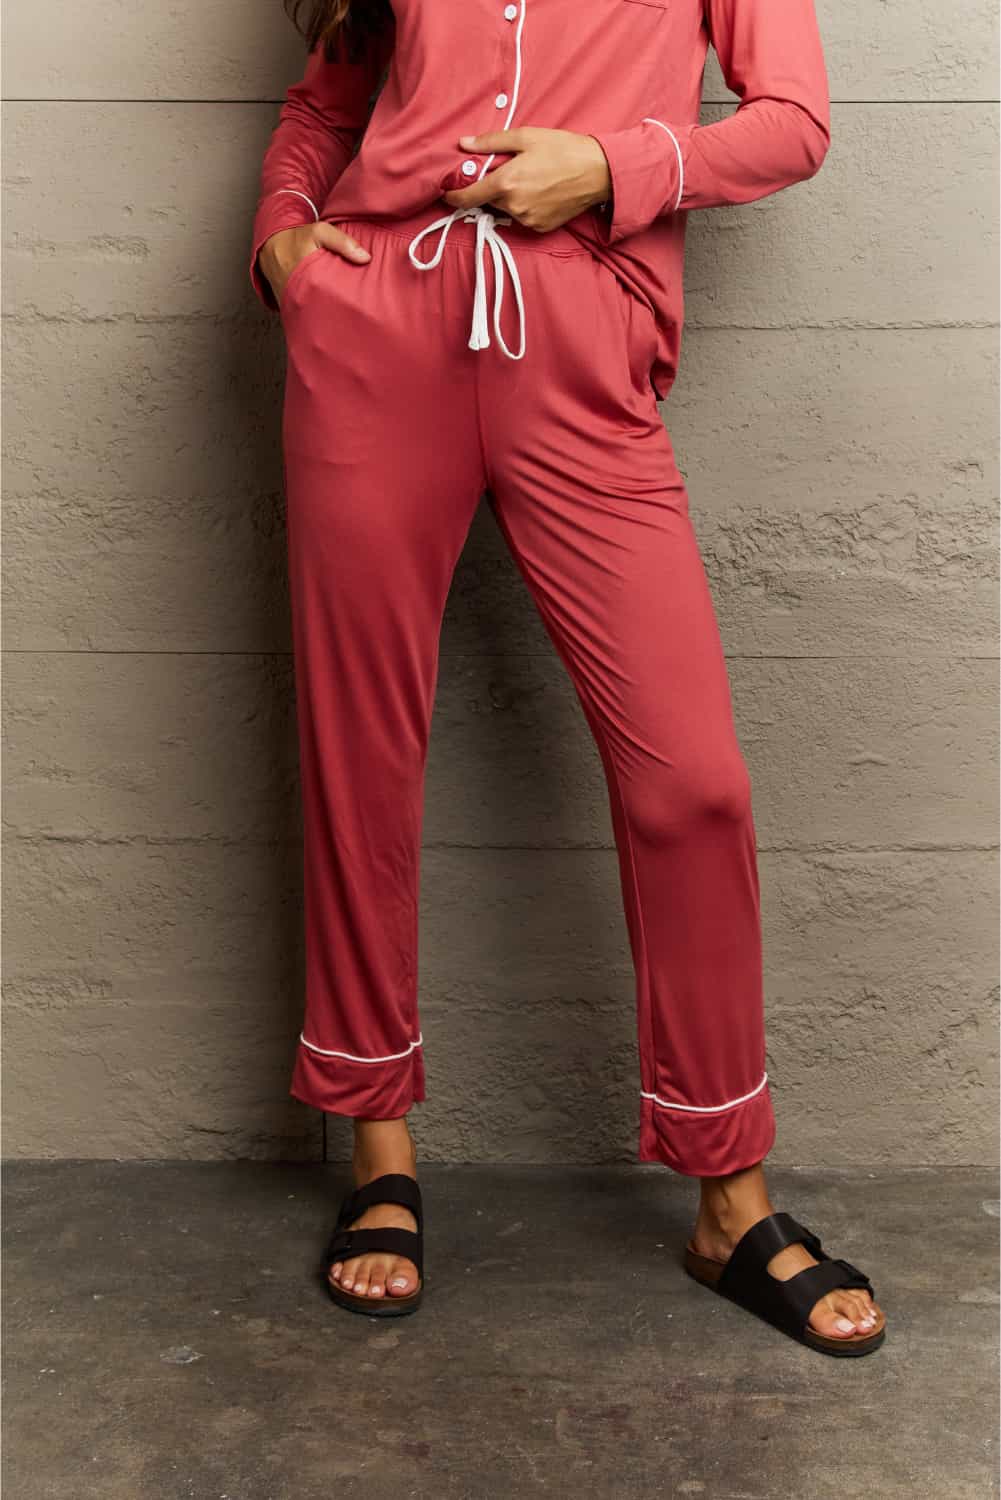 Women’s Ninexis Buttoned Collared Neck Top and Pants Pajama Set